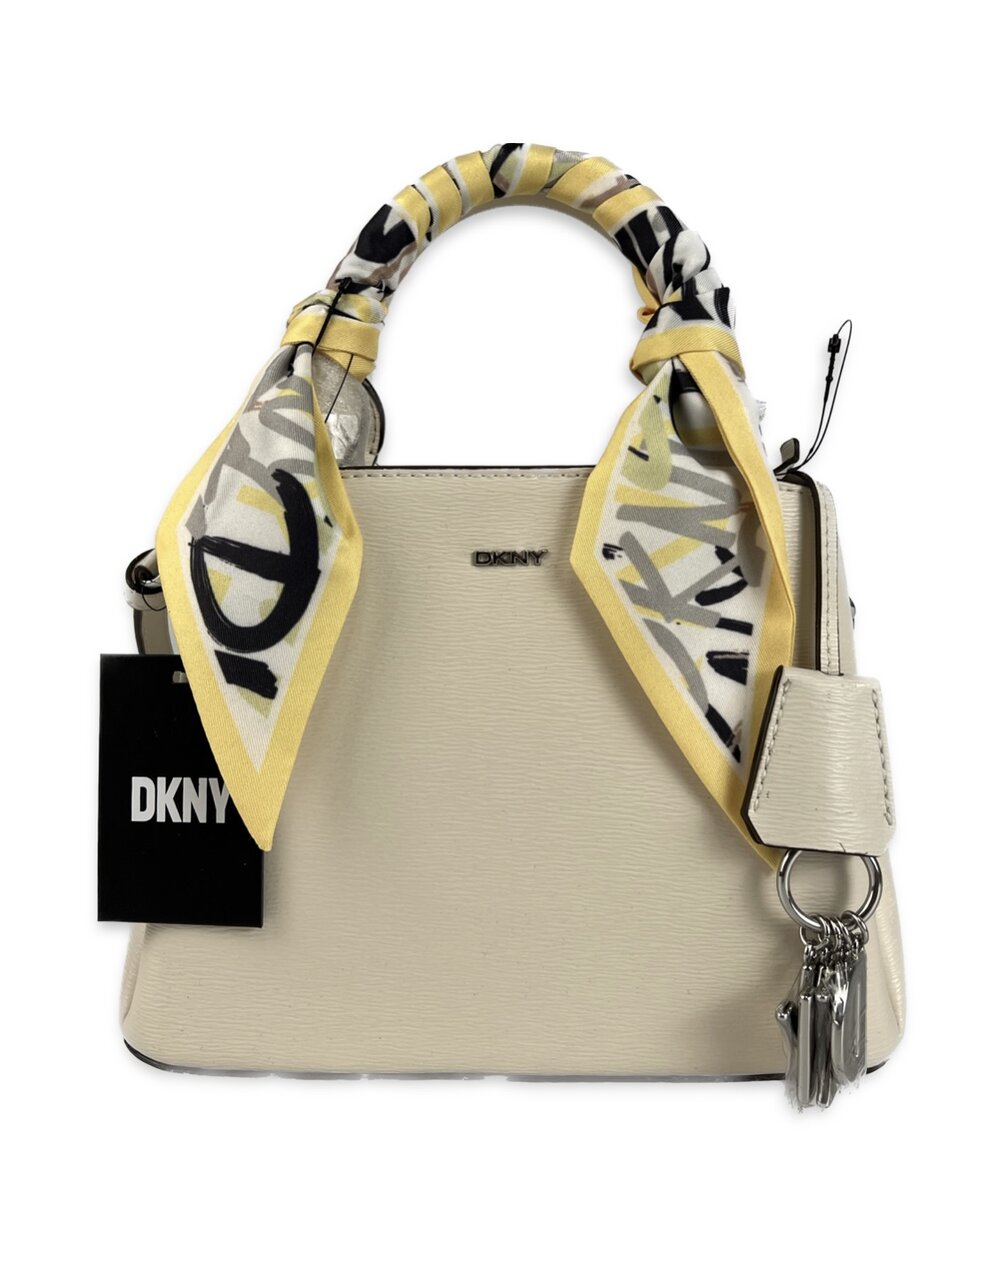 New! DKNY Paige SM Satchel Handbag — Fashion Cents Consignment & Thrift  Stores in Ephrata, Strasburg, East Earl, Morgantown PA